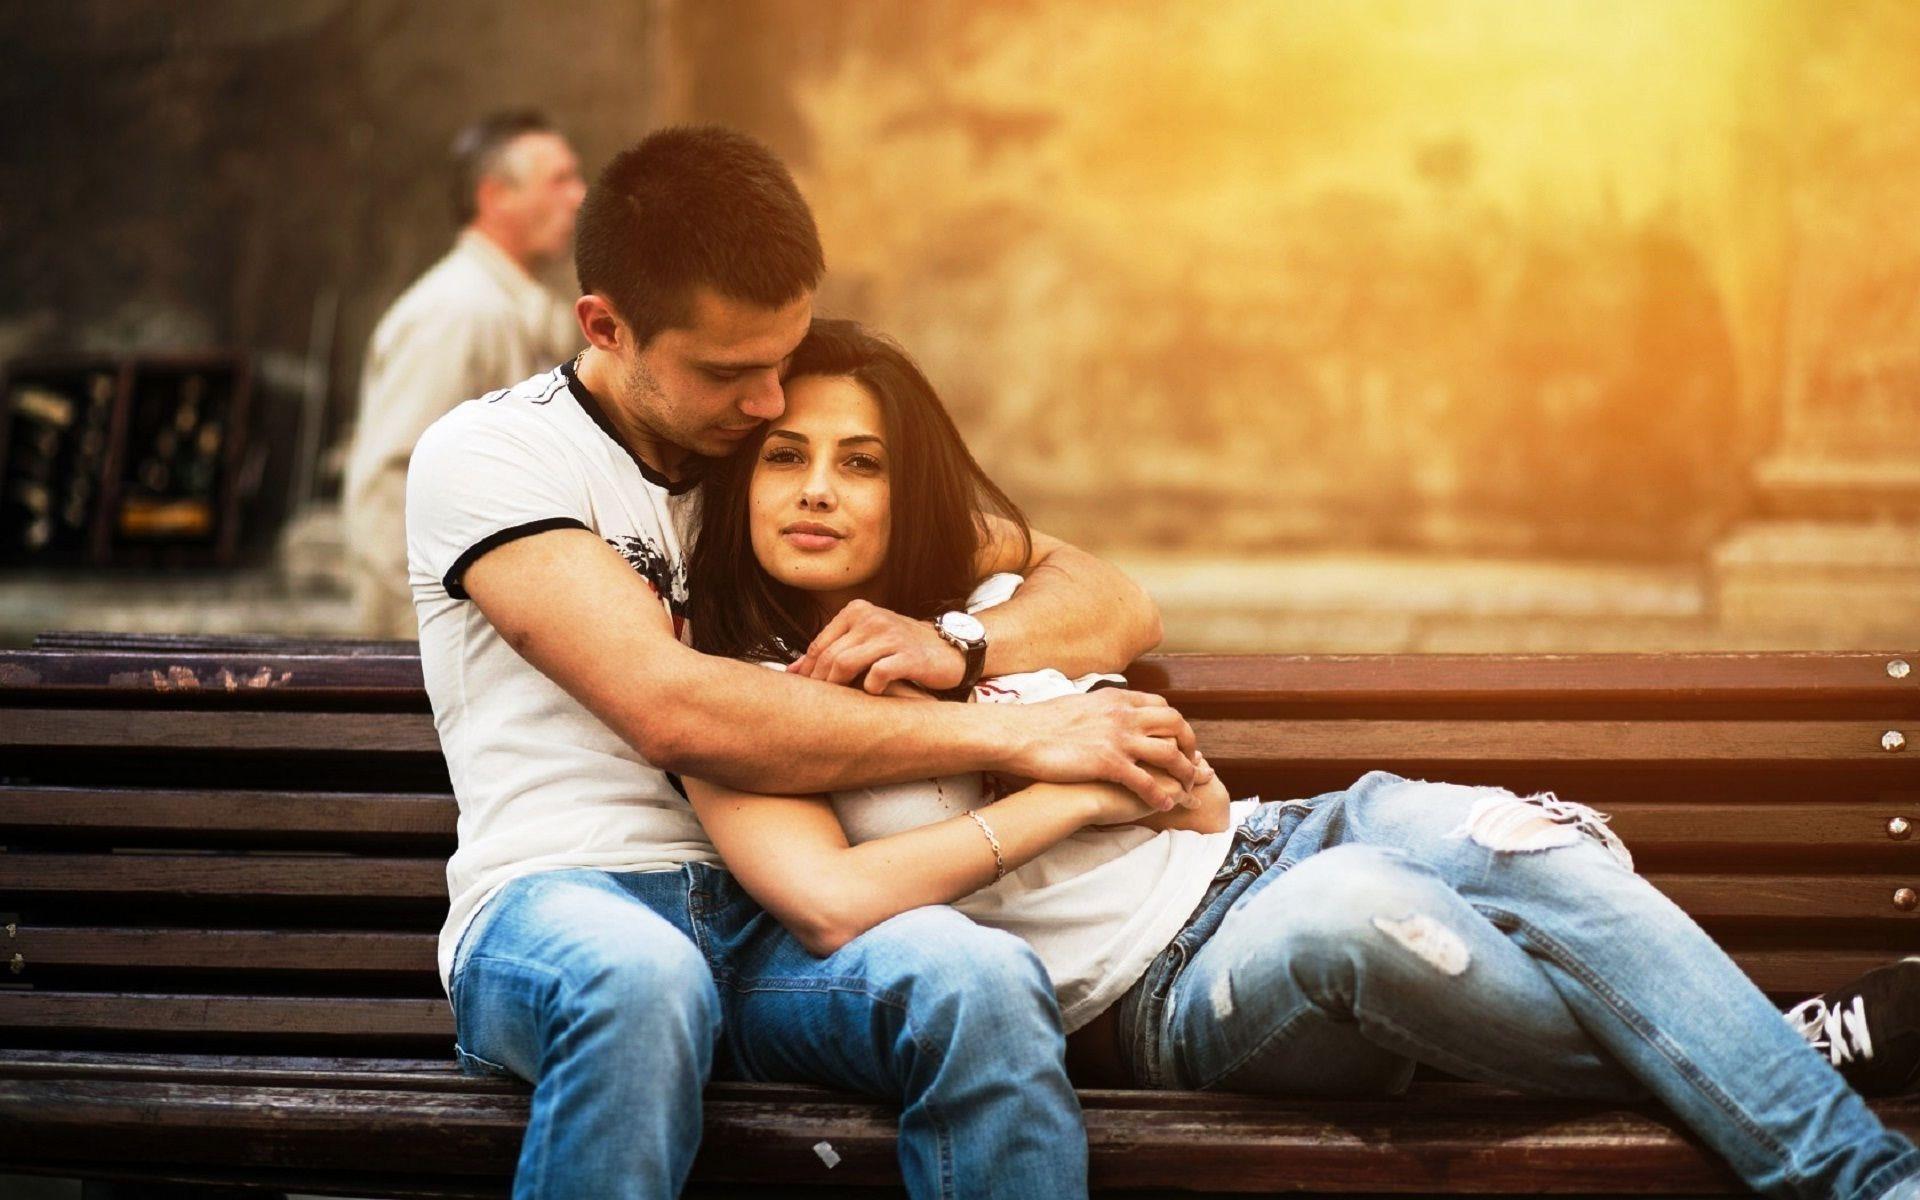 Love romance of young couple hugs image HD wallpaperNew HD